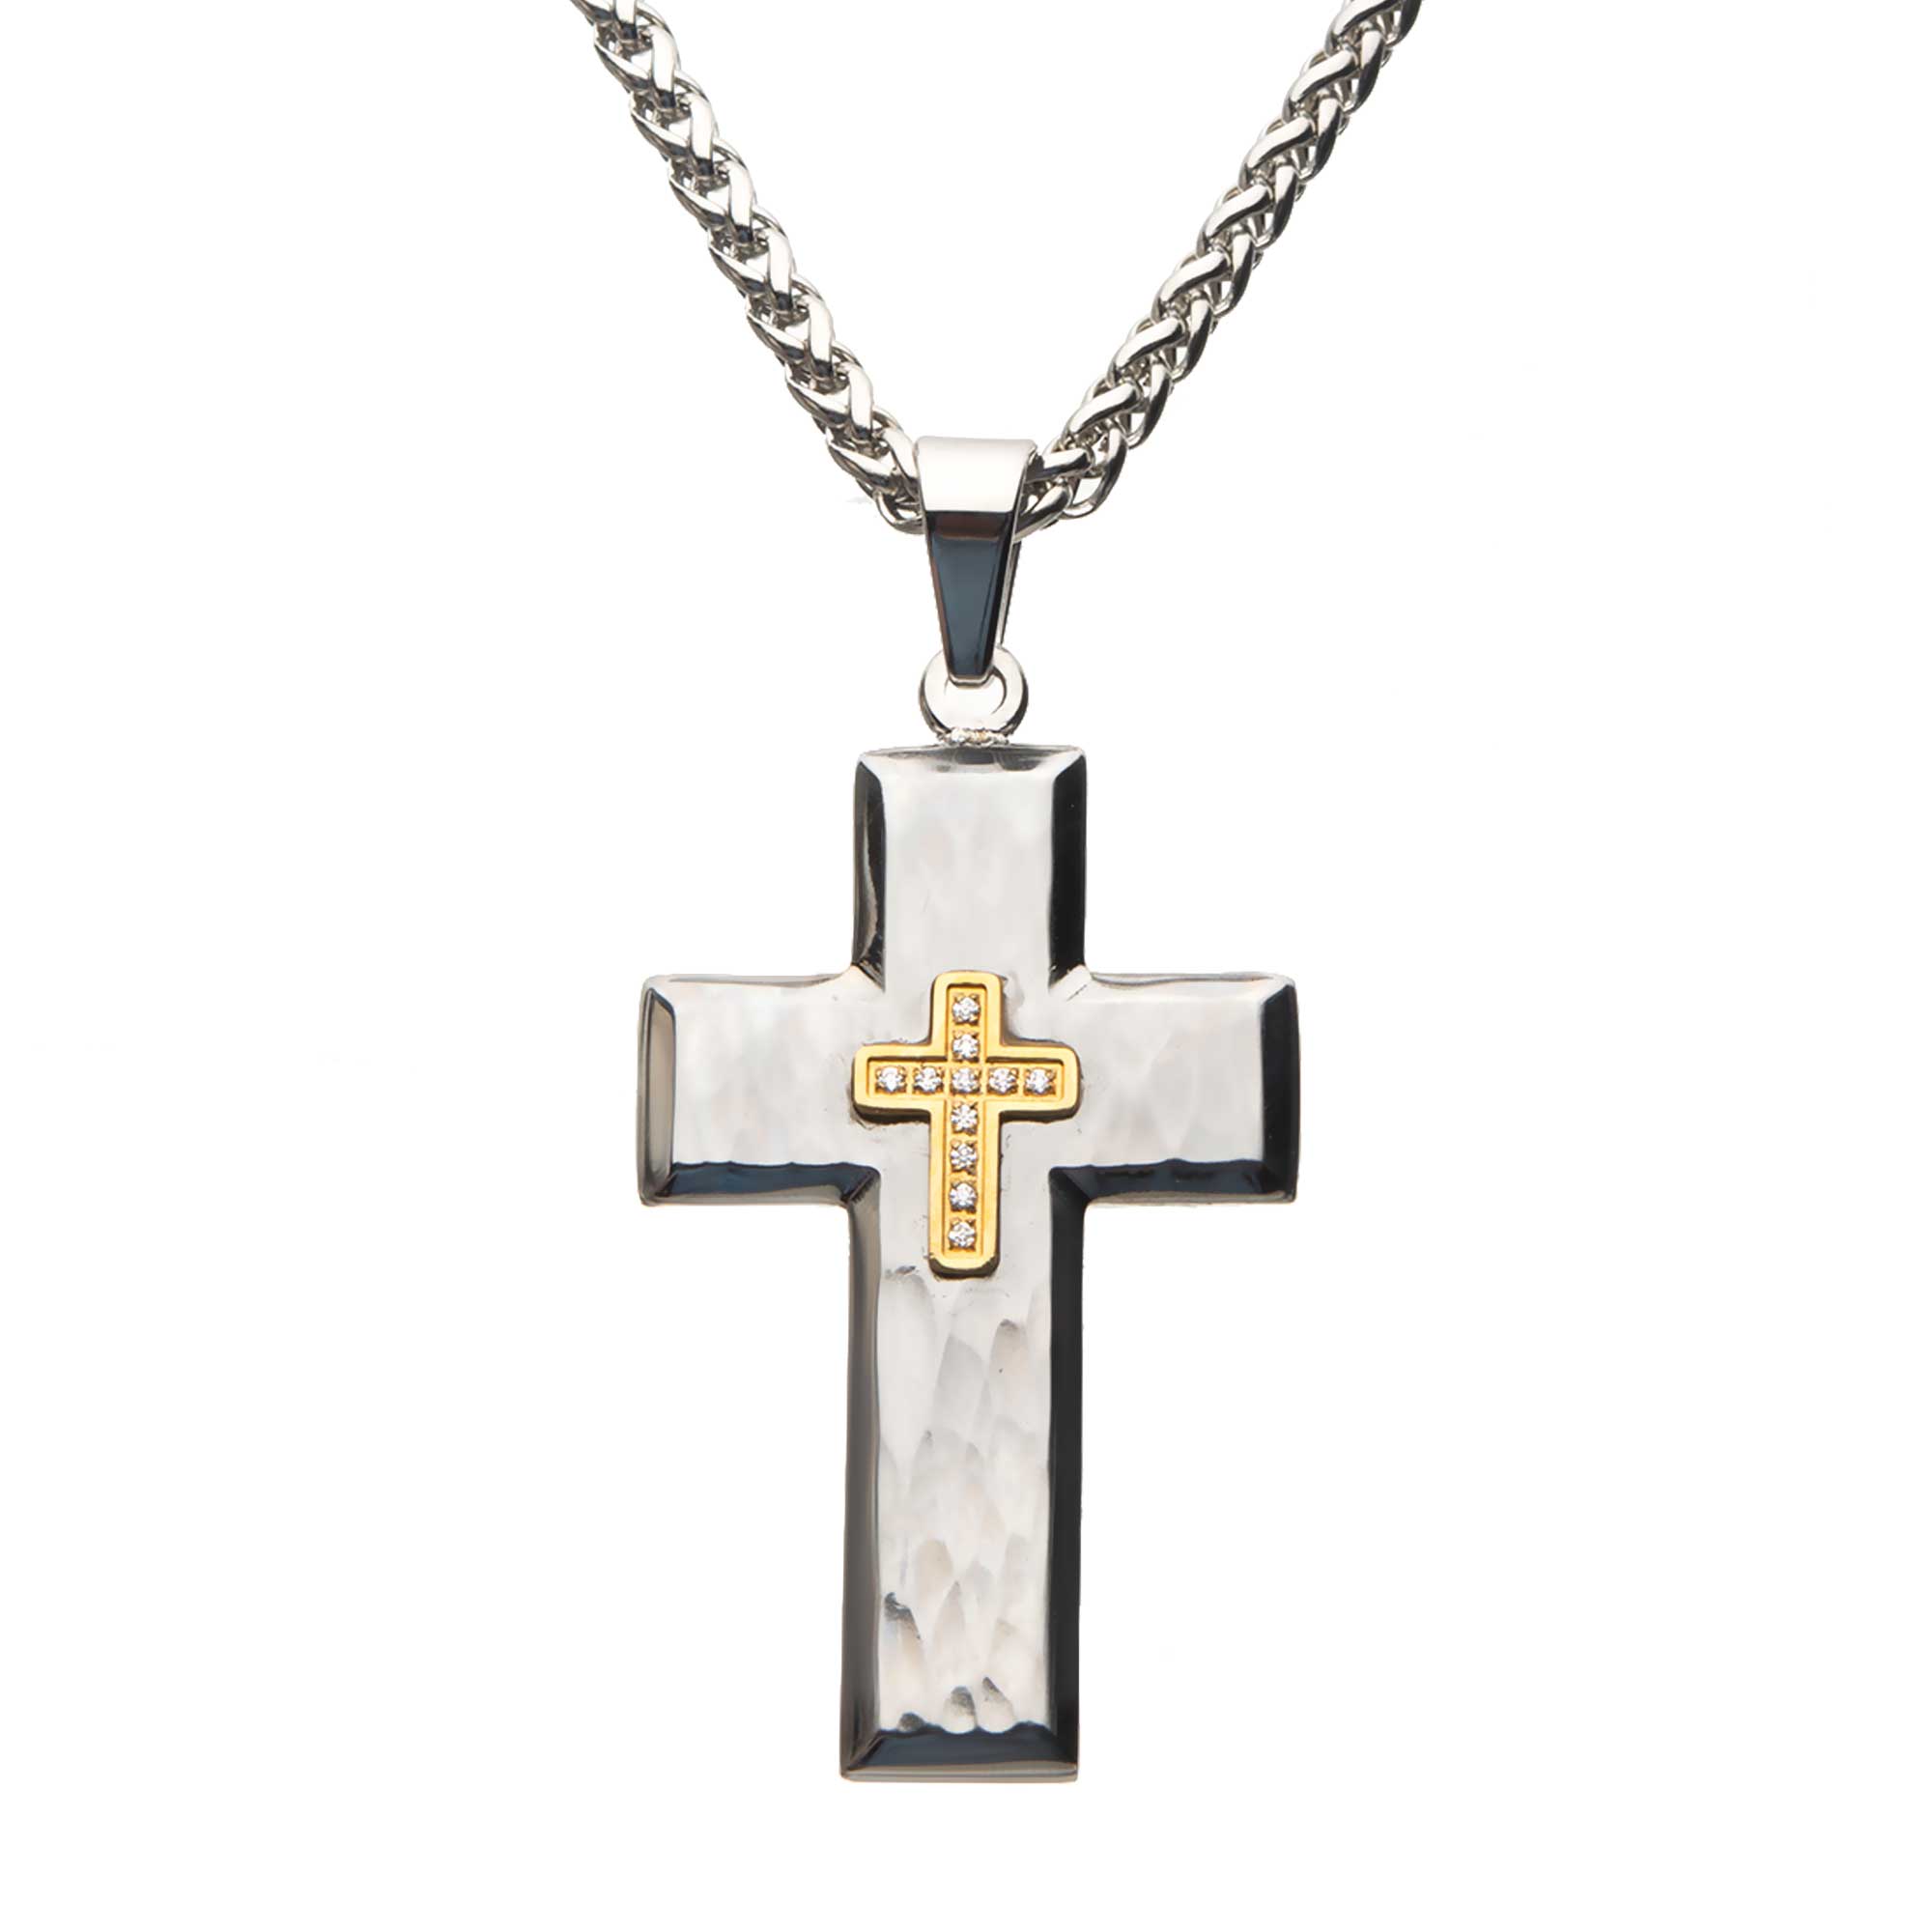 Gold Plated Cross with Clear CZs on Steel Hammered Cross Pendant with Wheat Chain P.K. Bennett Jewelers Mundelein, IL